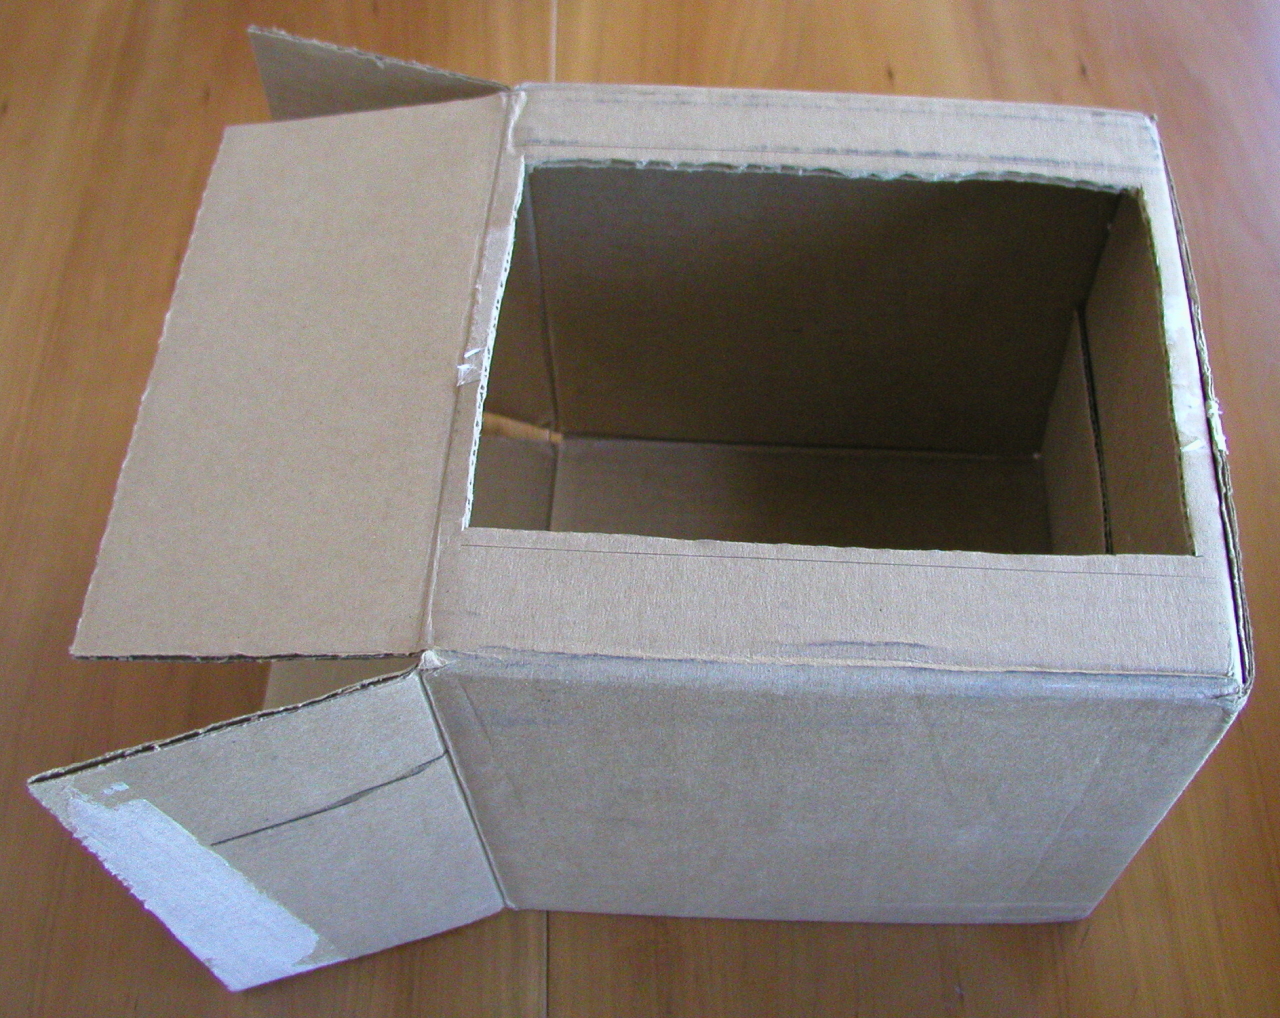 Box with hole